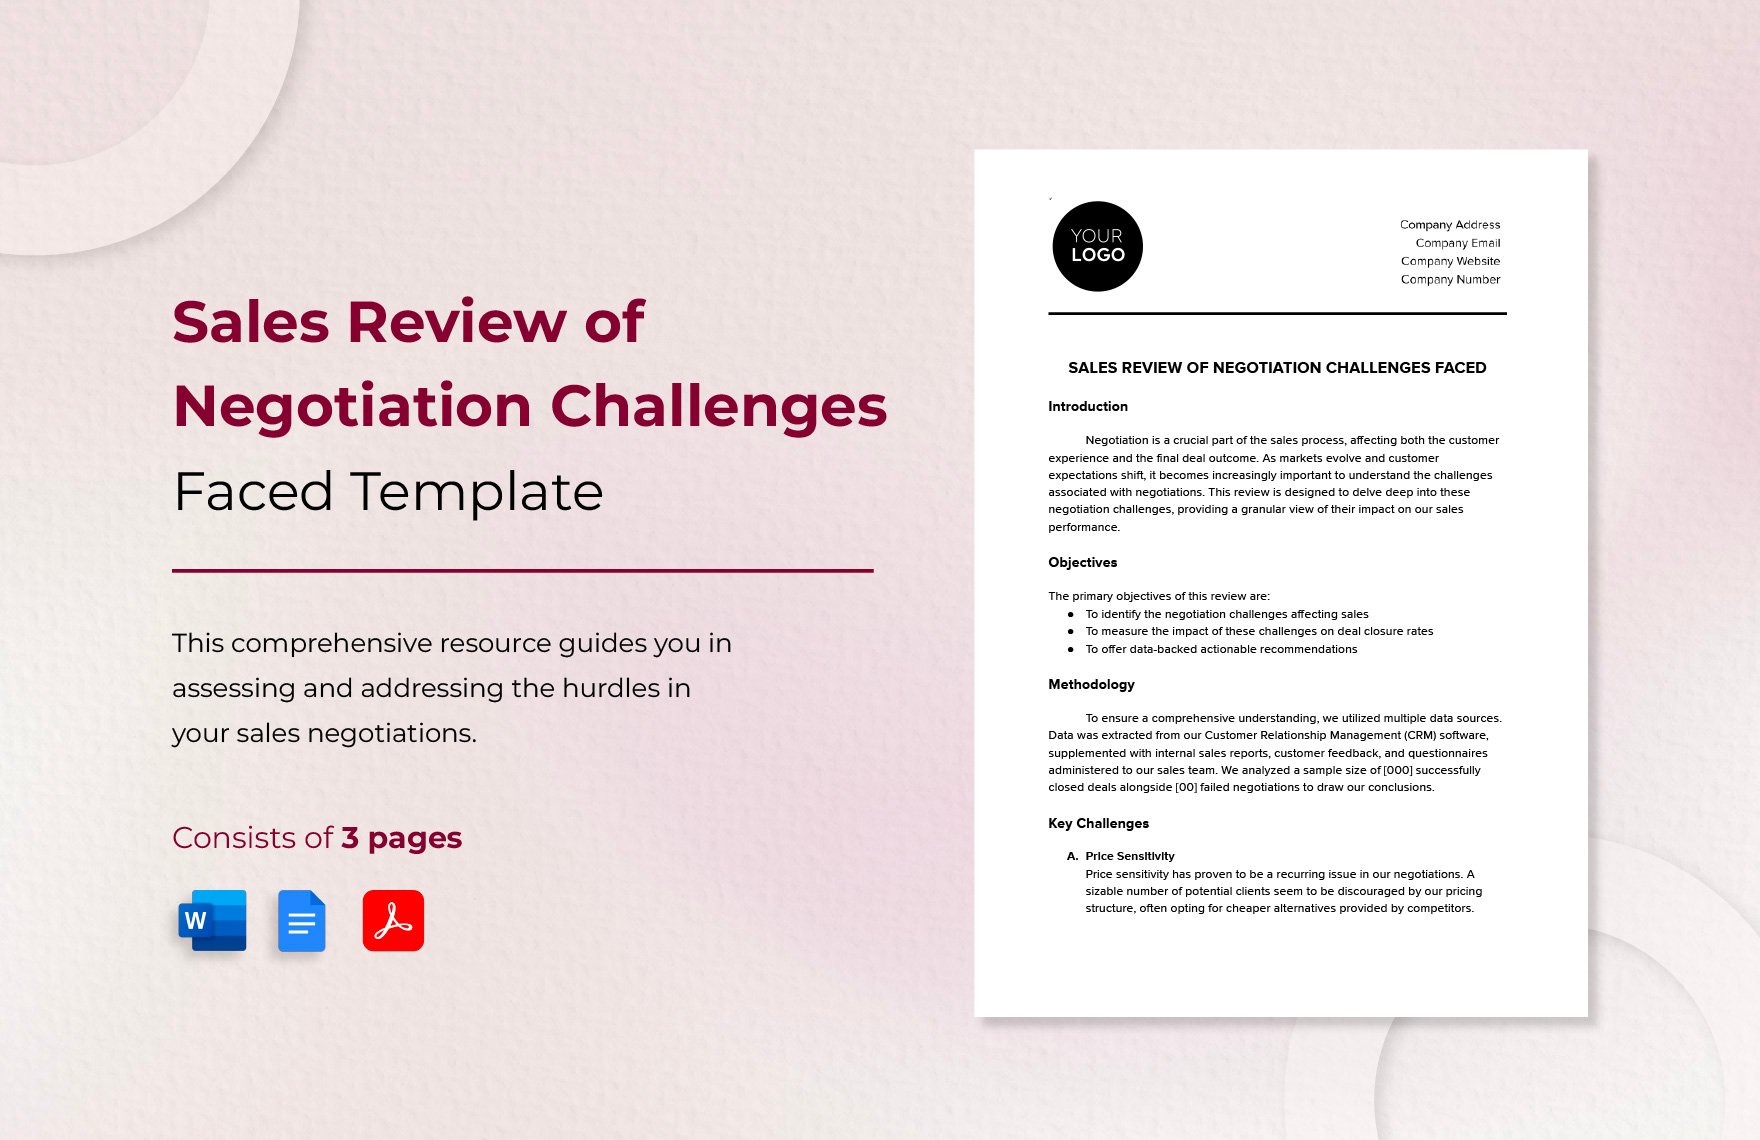 Sales Review of Negotiation Challenges Faced Template